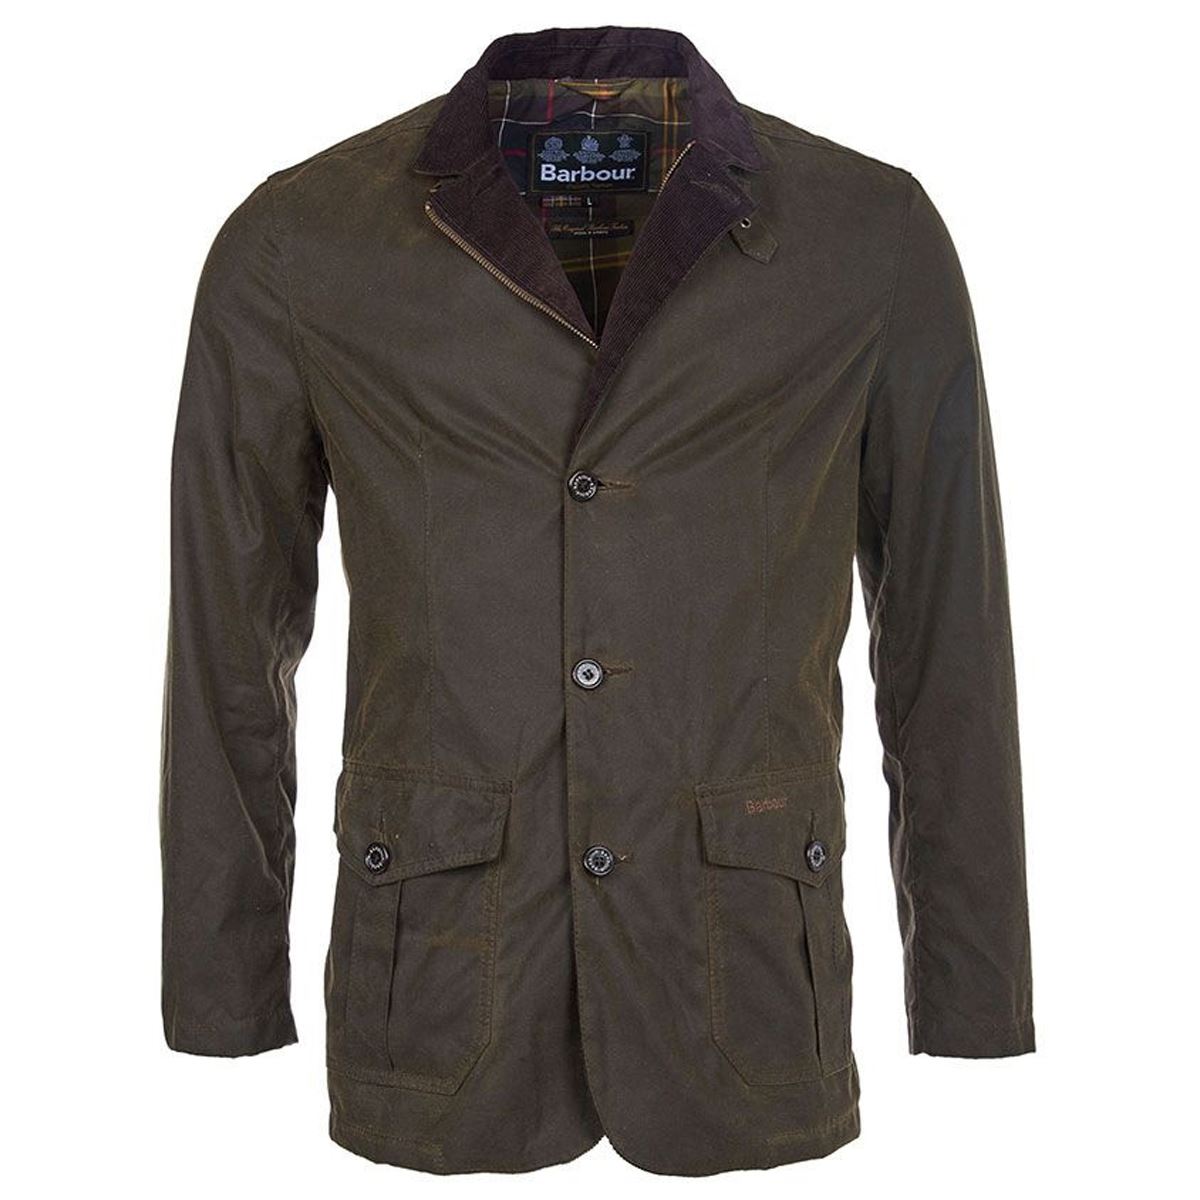 What sizes & colors are offered for the Barbour Lutz Wax Jacket?